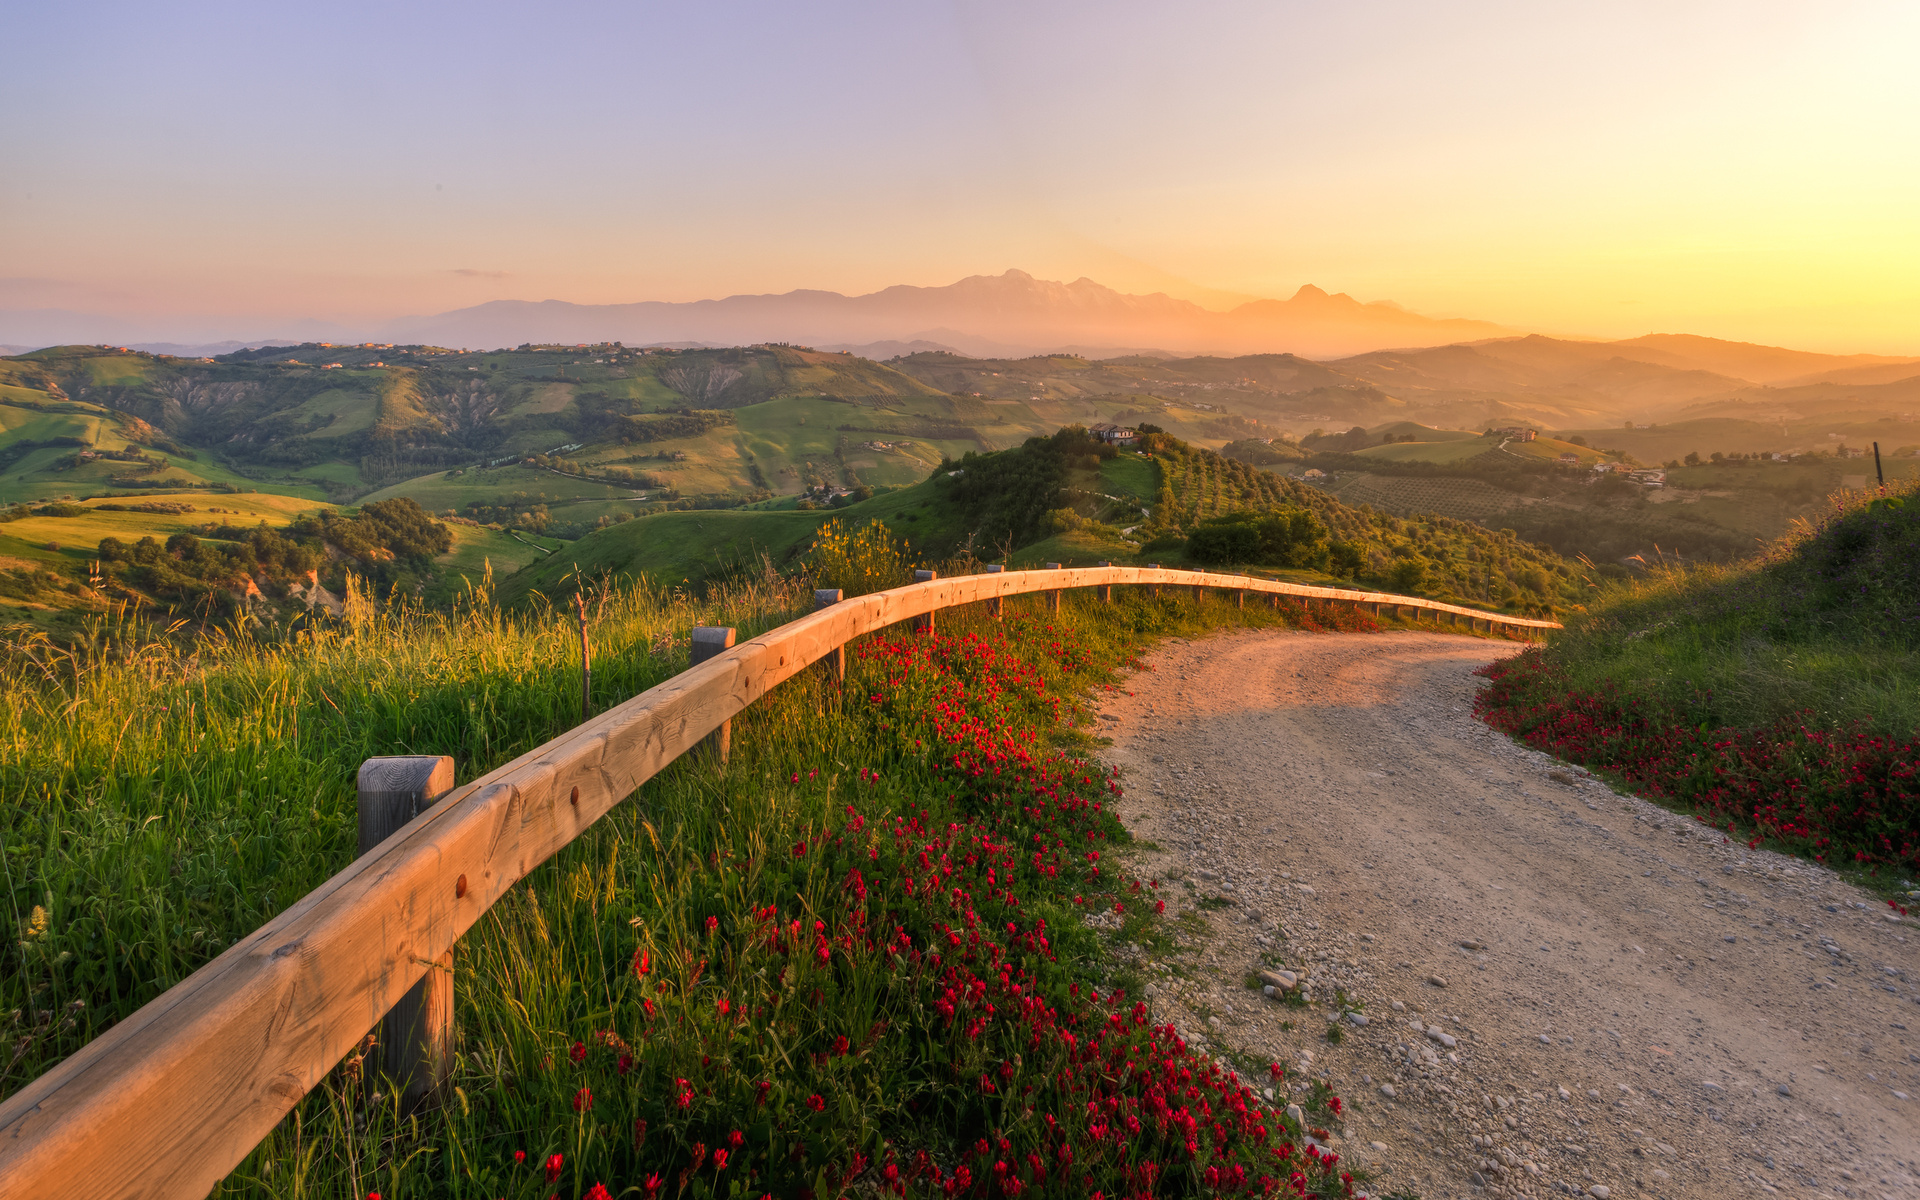 landscapes, Nature, Roads, Cities, Scenic, Sunset, Sunrise, Fence, Mountains, Skies, Sunlight, Flowers Wallpaper